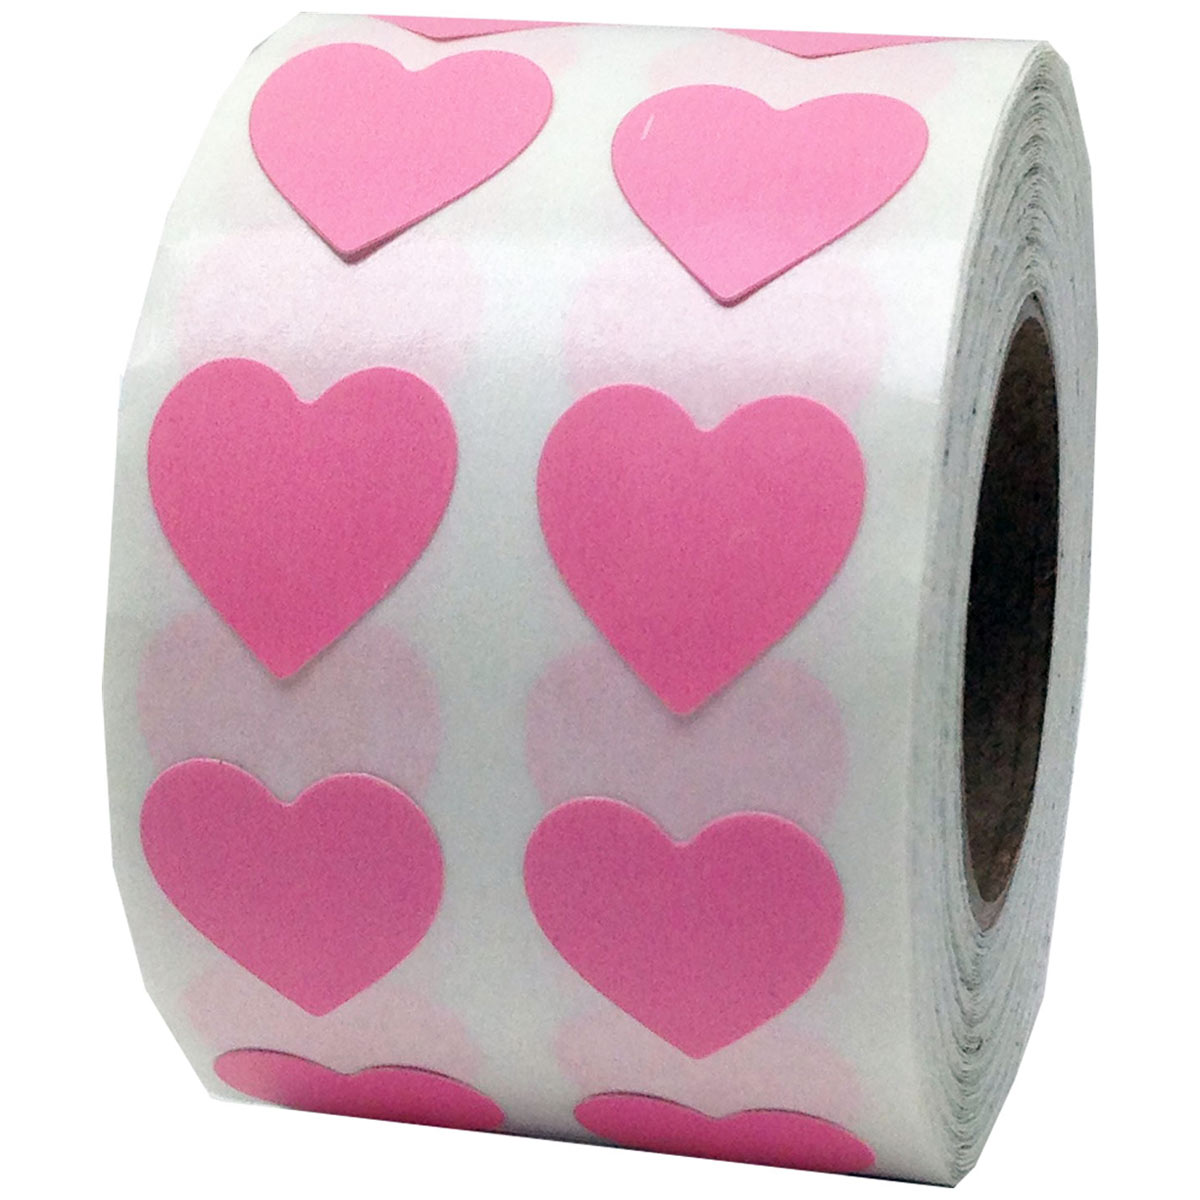 BLMHTWO 1000 Pieces Heart Stickers Roll, 25mm/1 inch Pink Stickers Pink  Heart Labels for Envelopes with Self-Adhesive and Strong Viscosity Heart